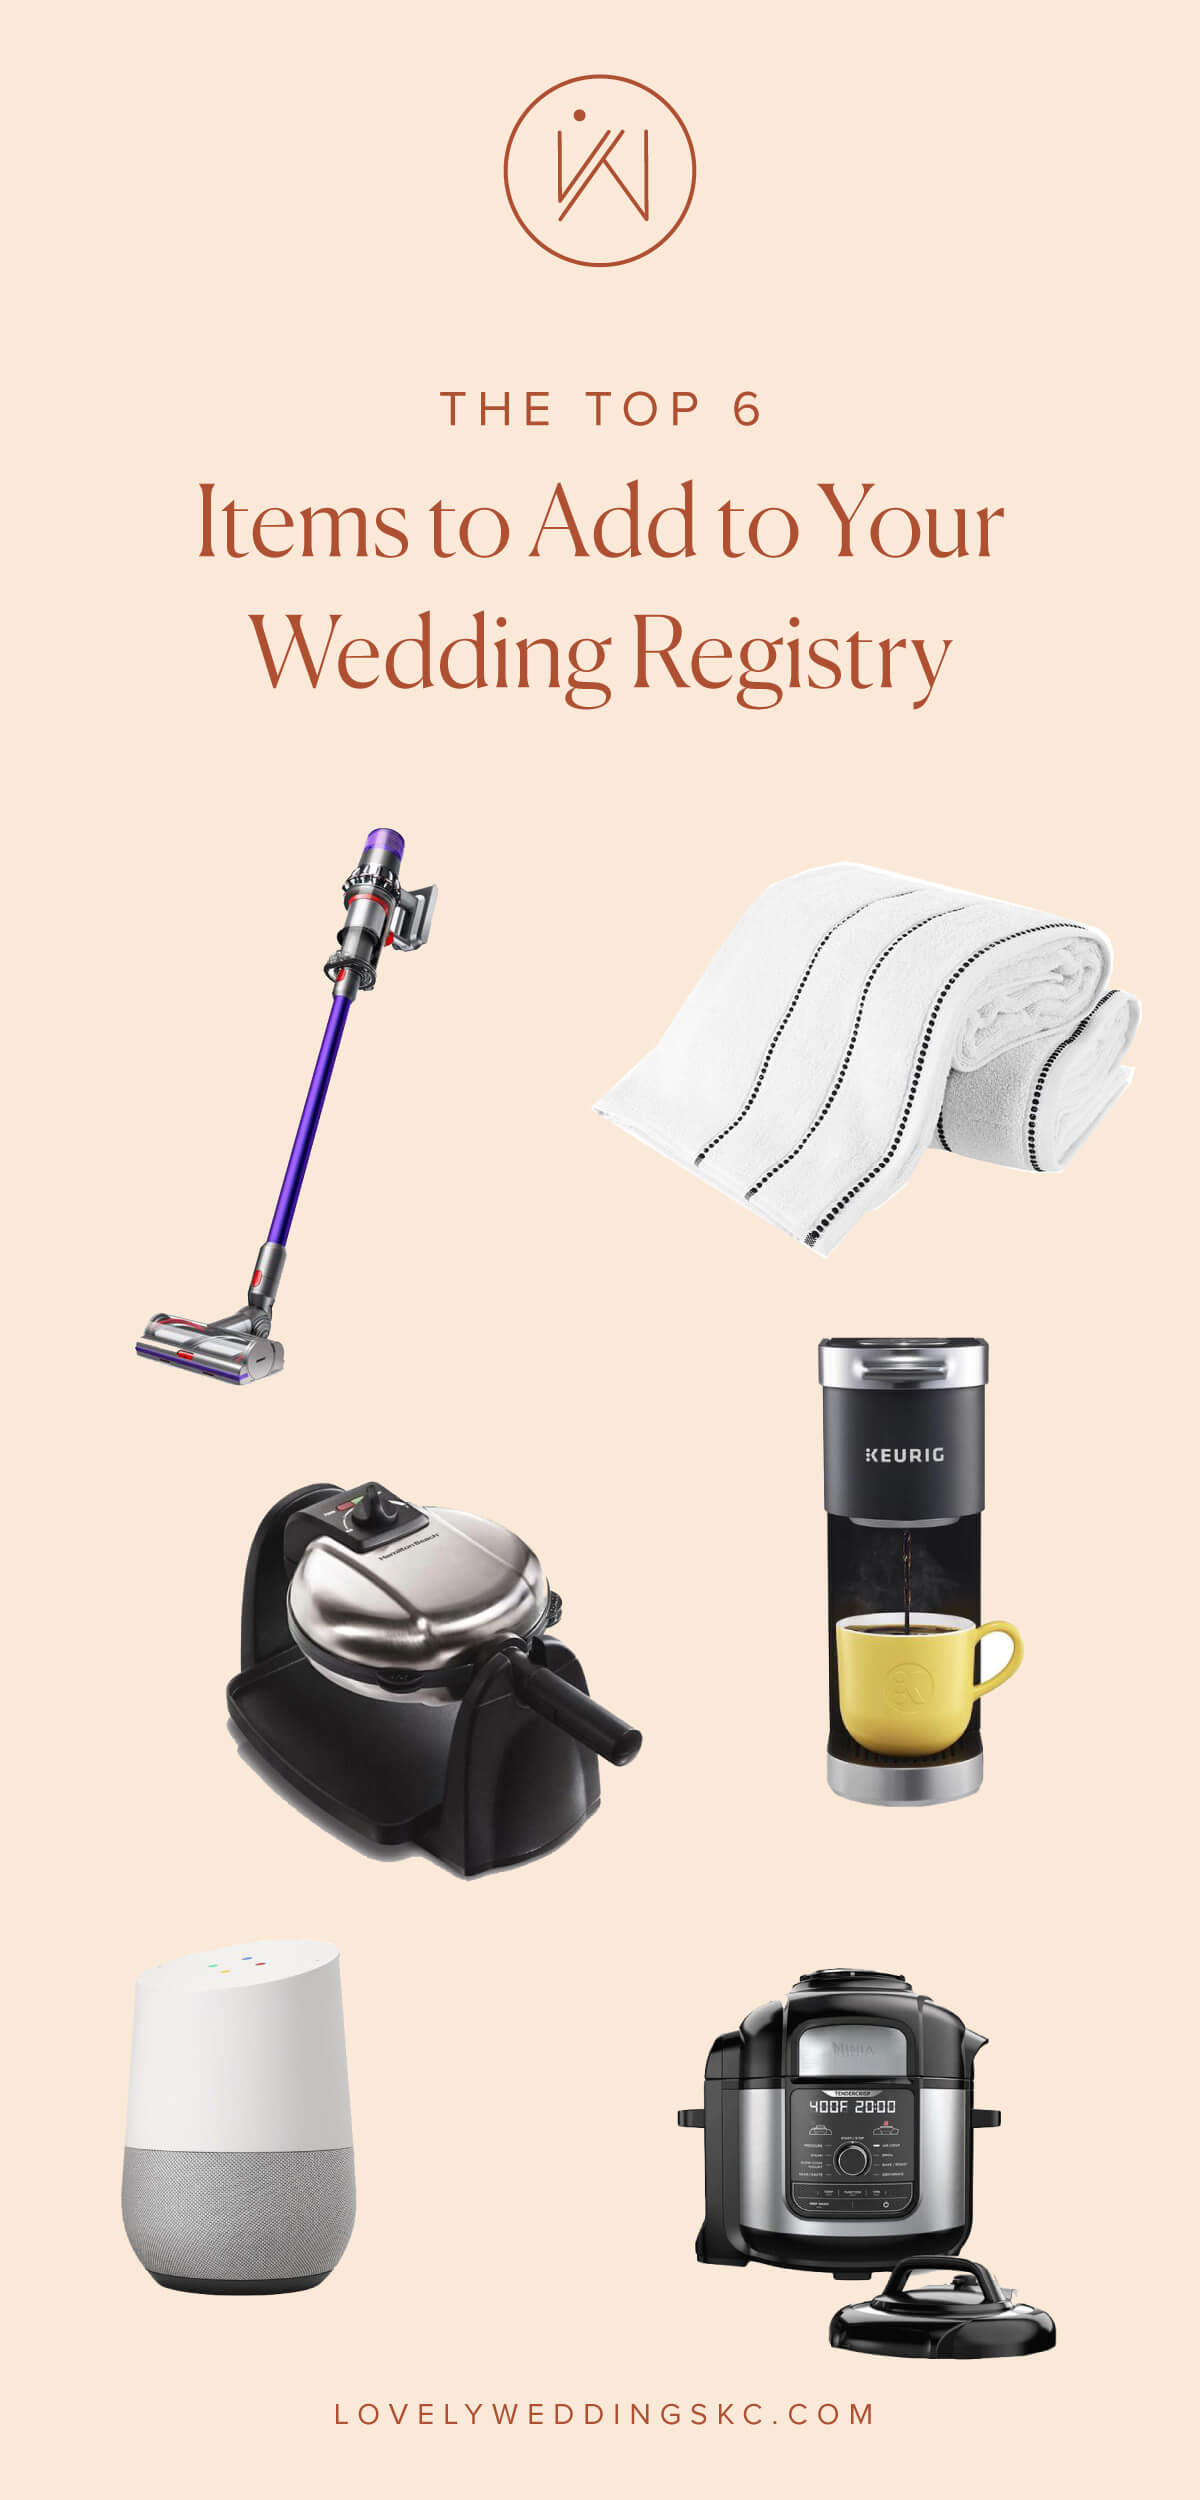 The Two Most Popular Wedding Registry Items for 2017